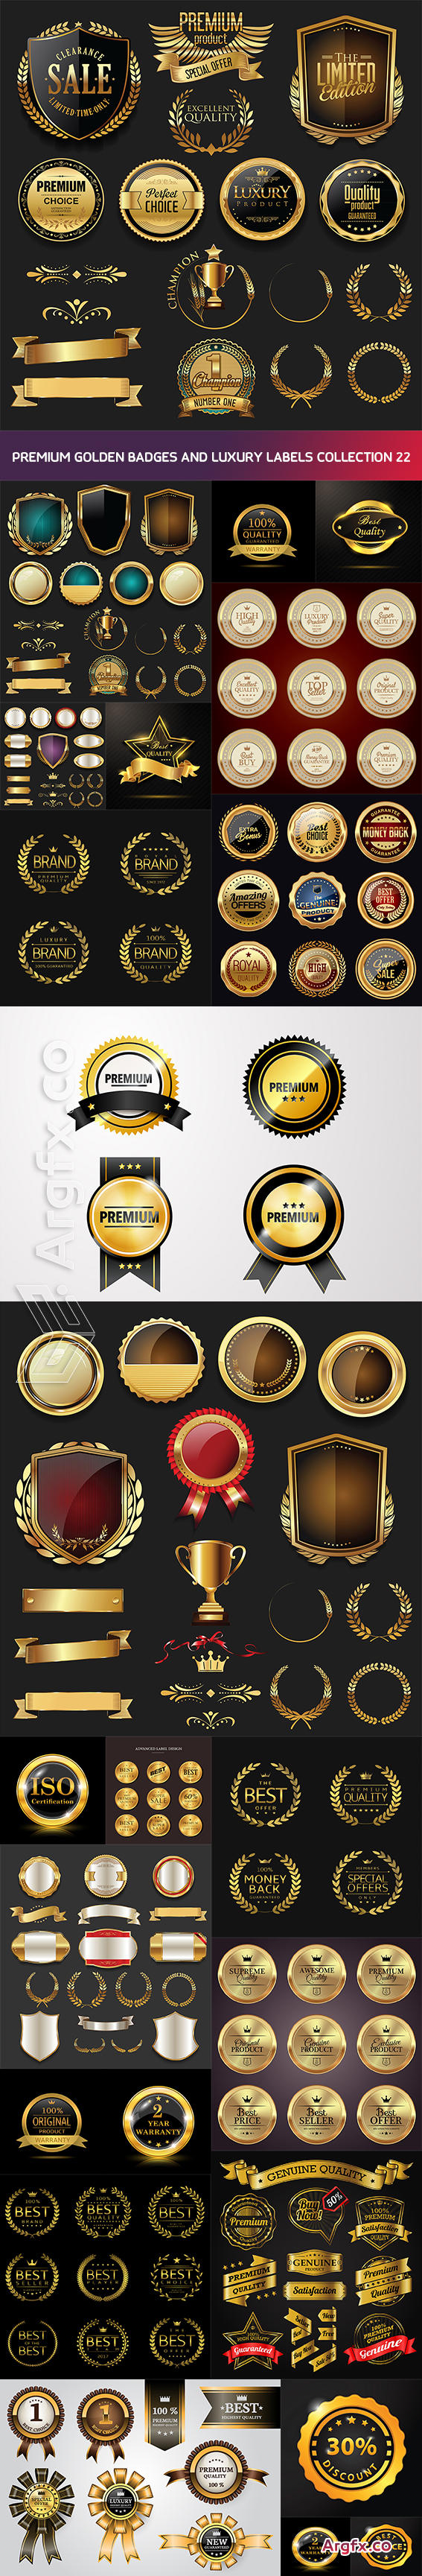  Premium golden badges and luxury labels collection 22